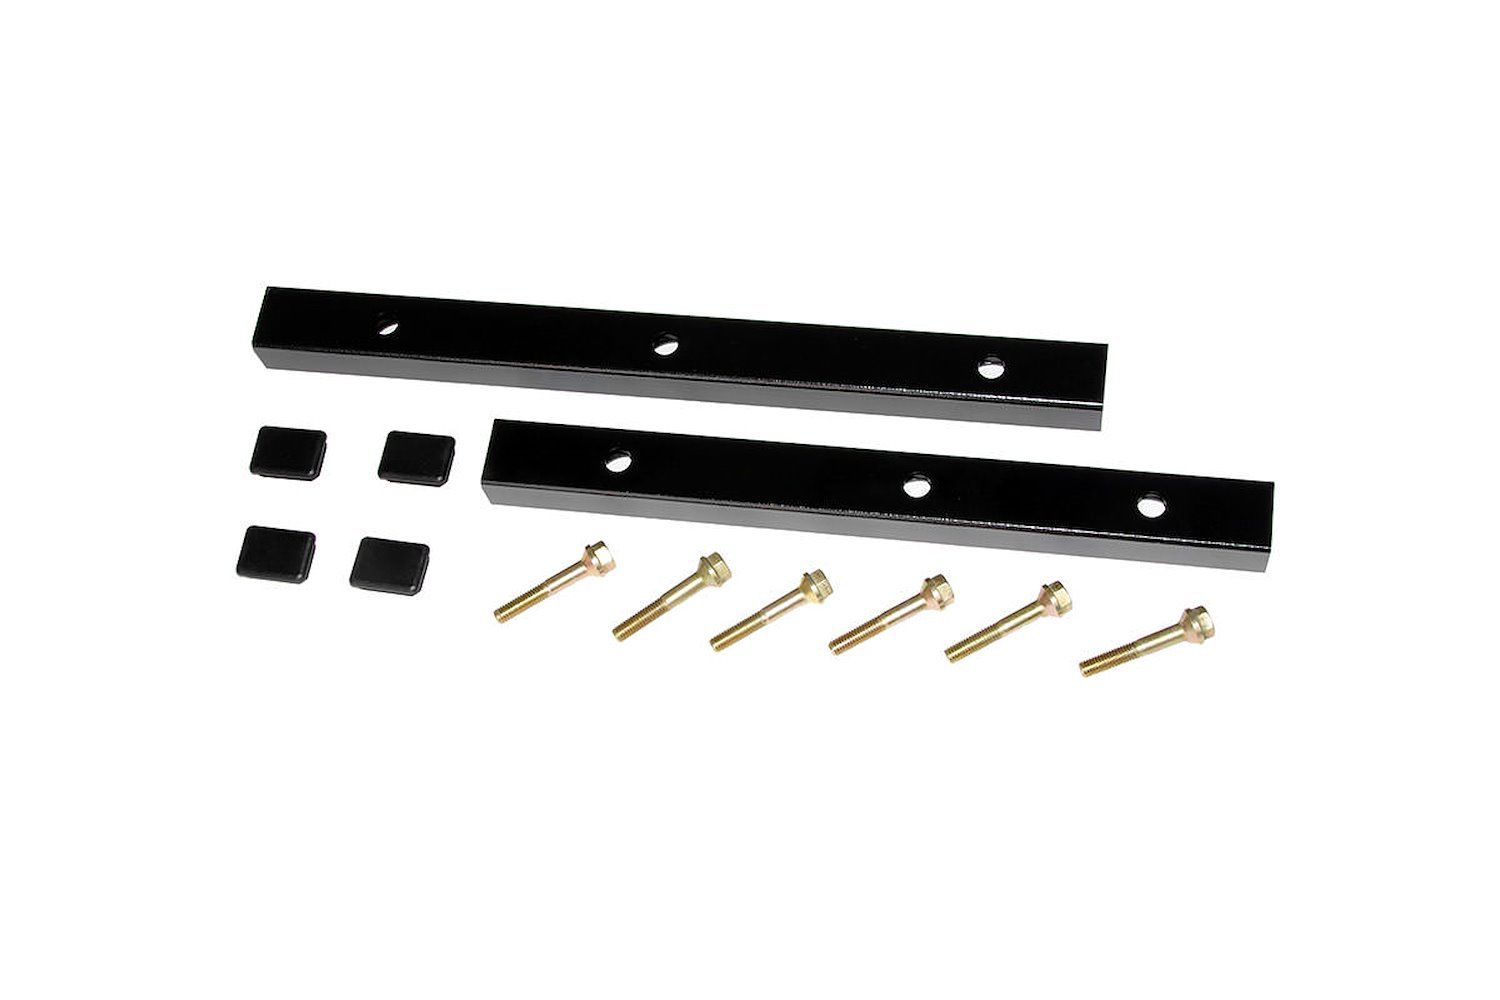 1668TC Transfer Case Drop Kit for 4-6-inch Lifts